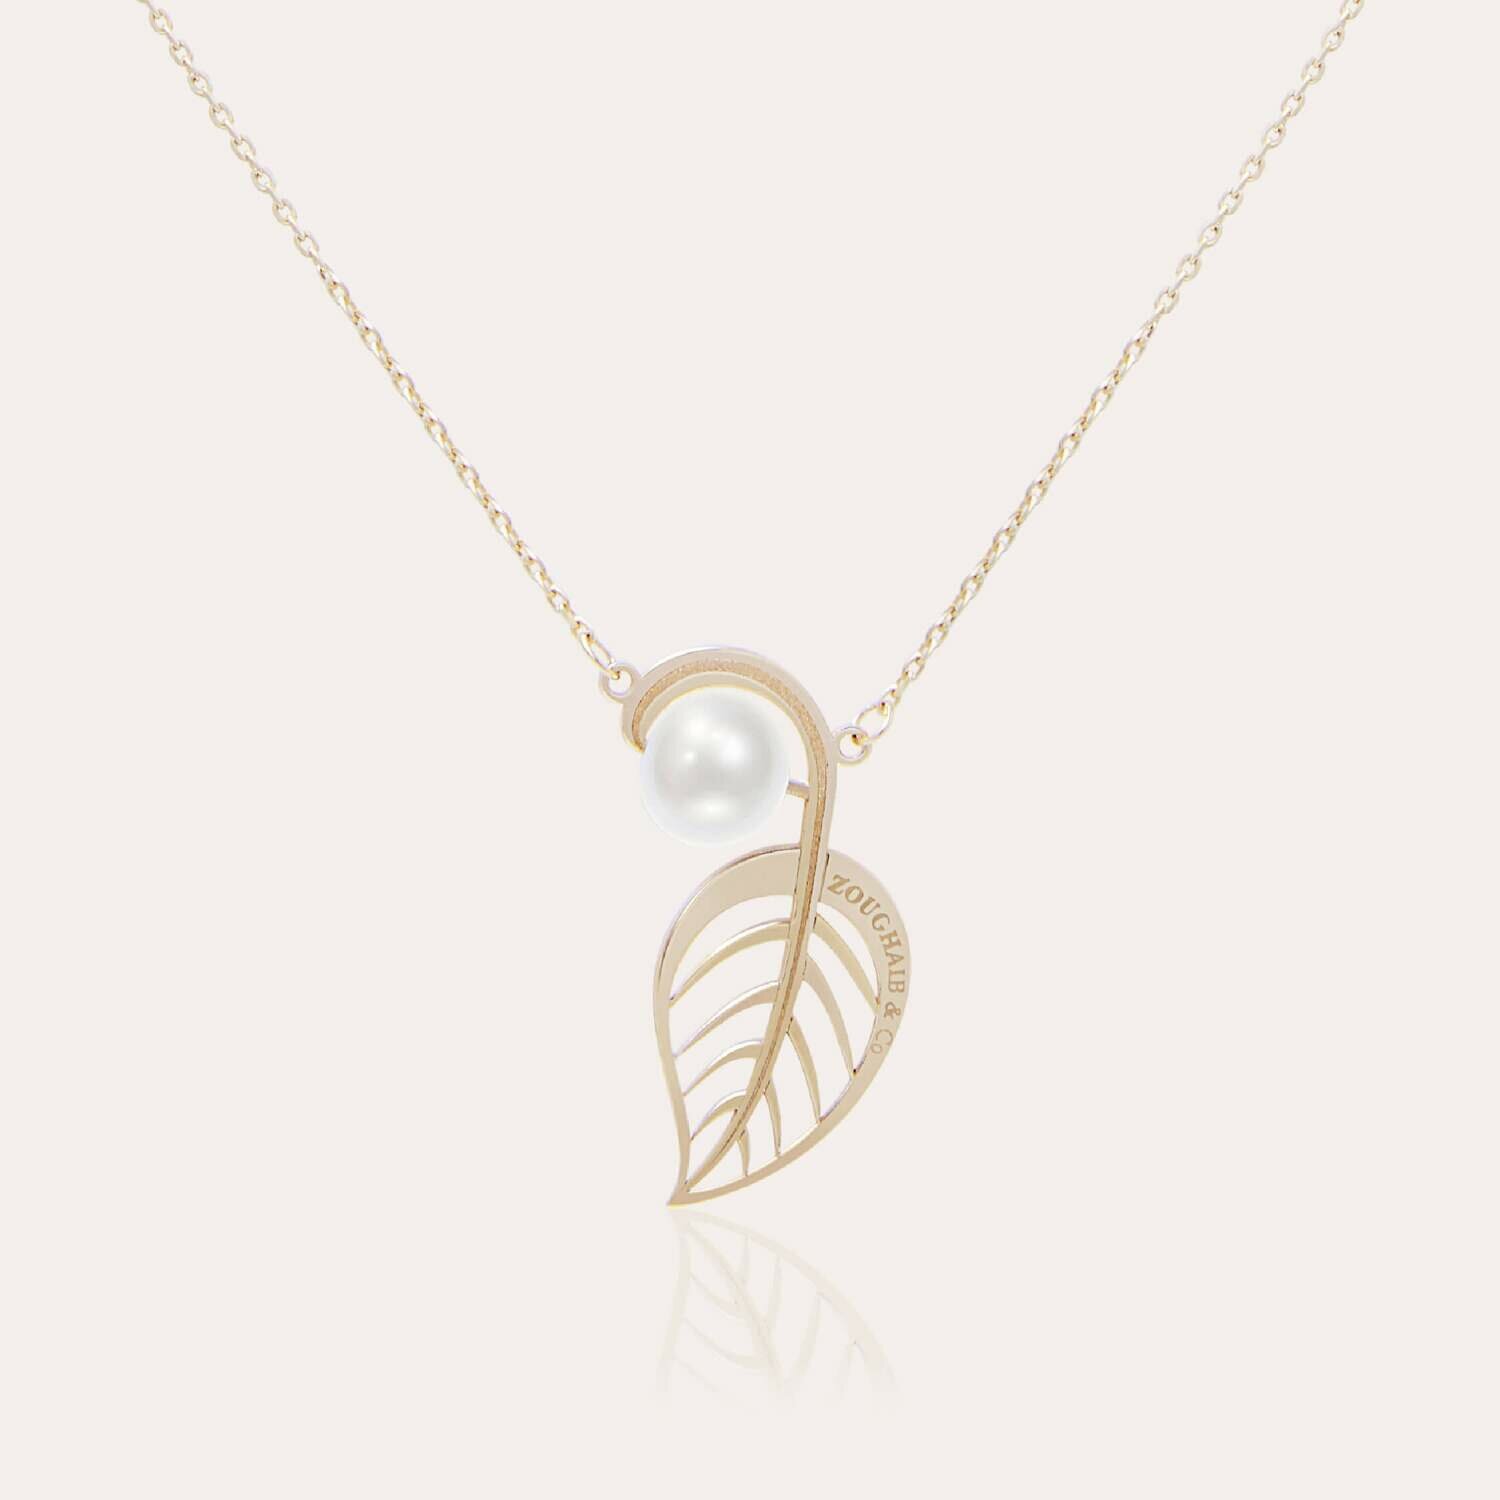 Leaves Gold Necklace with Pearl